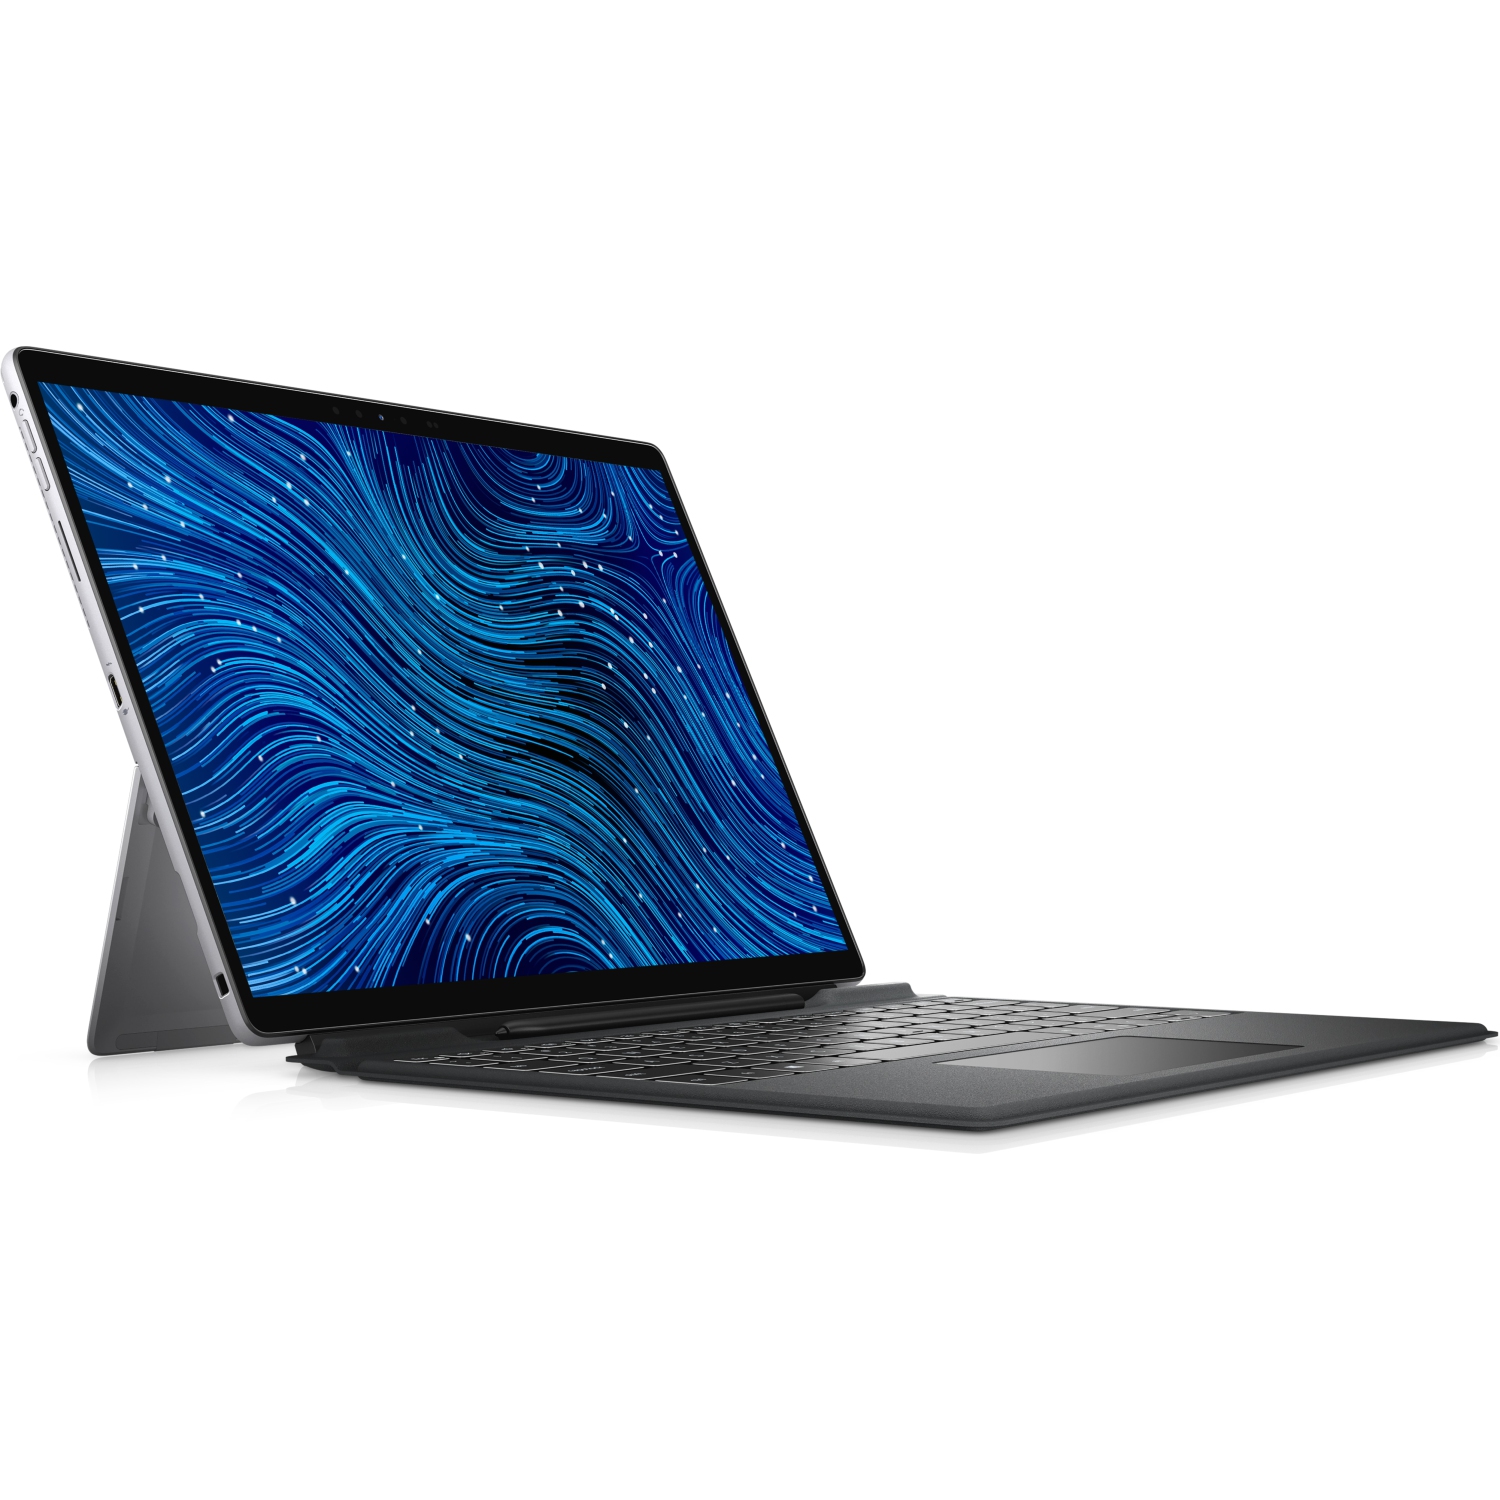 Refurbished (Excellent) - Dell Latitude 7000 7320 Detachable 13 2-in-1 (2021), 13" FHD+ Touch, Core i3, 256GB SSD, 4GB RAM, 2 Cores @ 3.9 GHz, 11th Gen CPU Certified